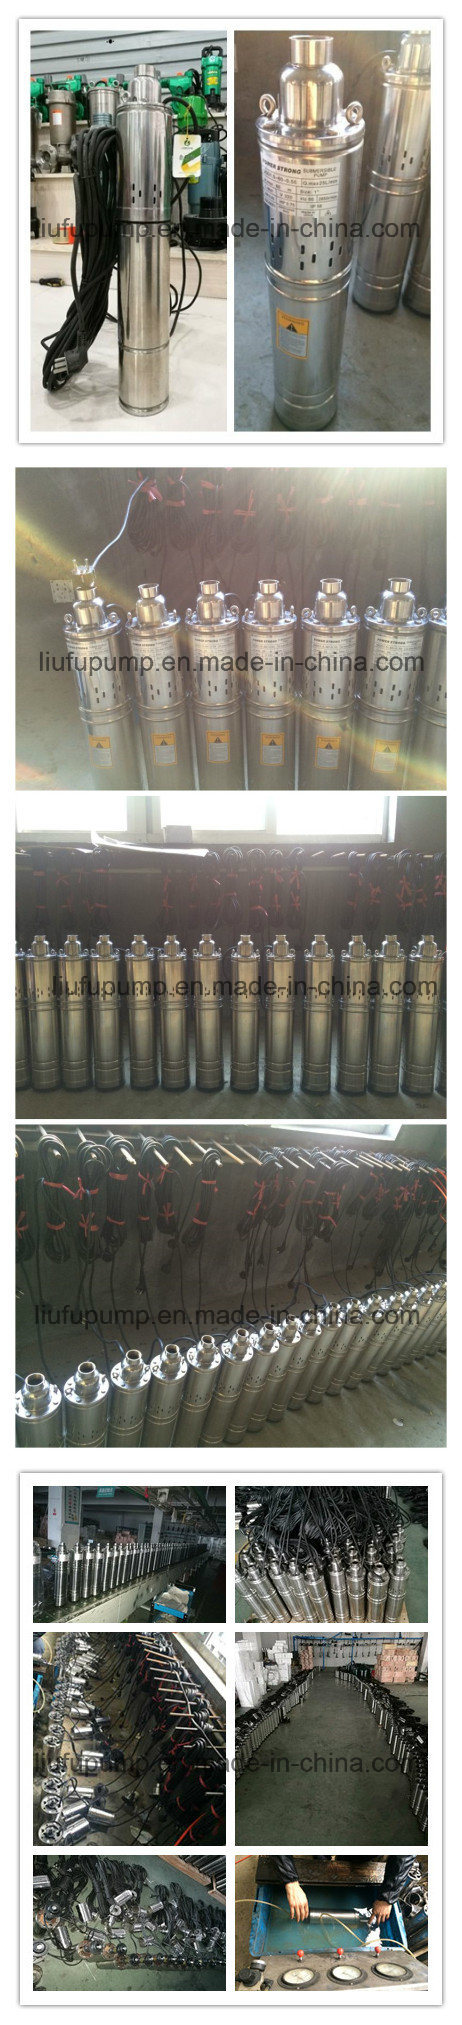 Stainless Steel Pump Body Screw Pump for Clean Water